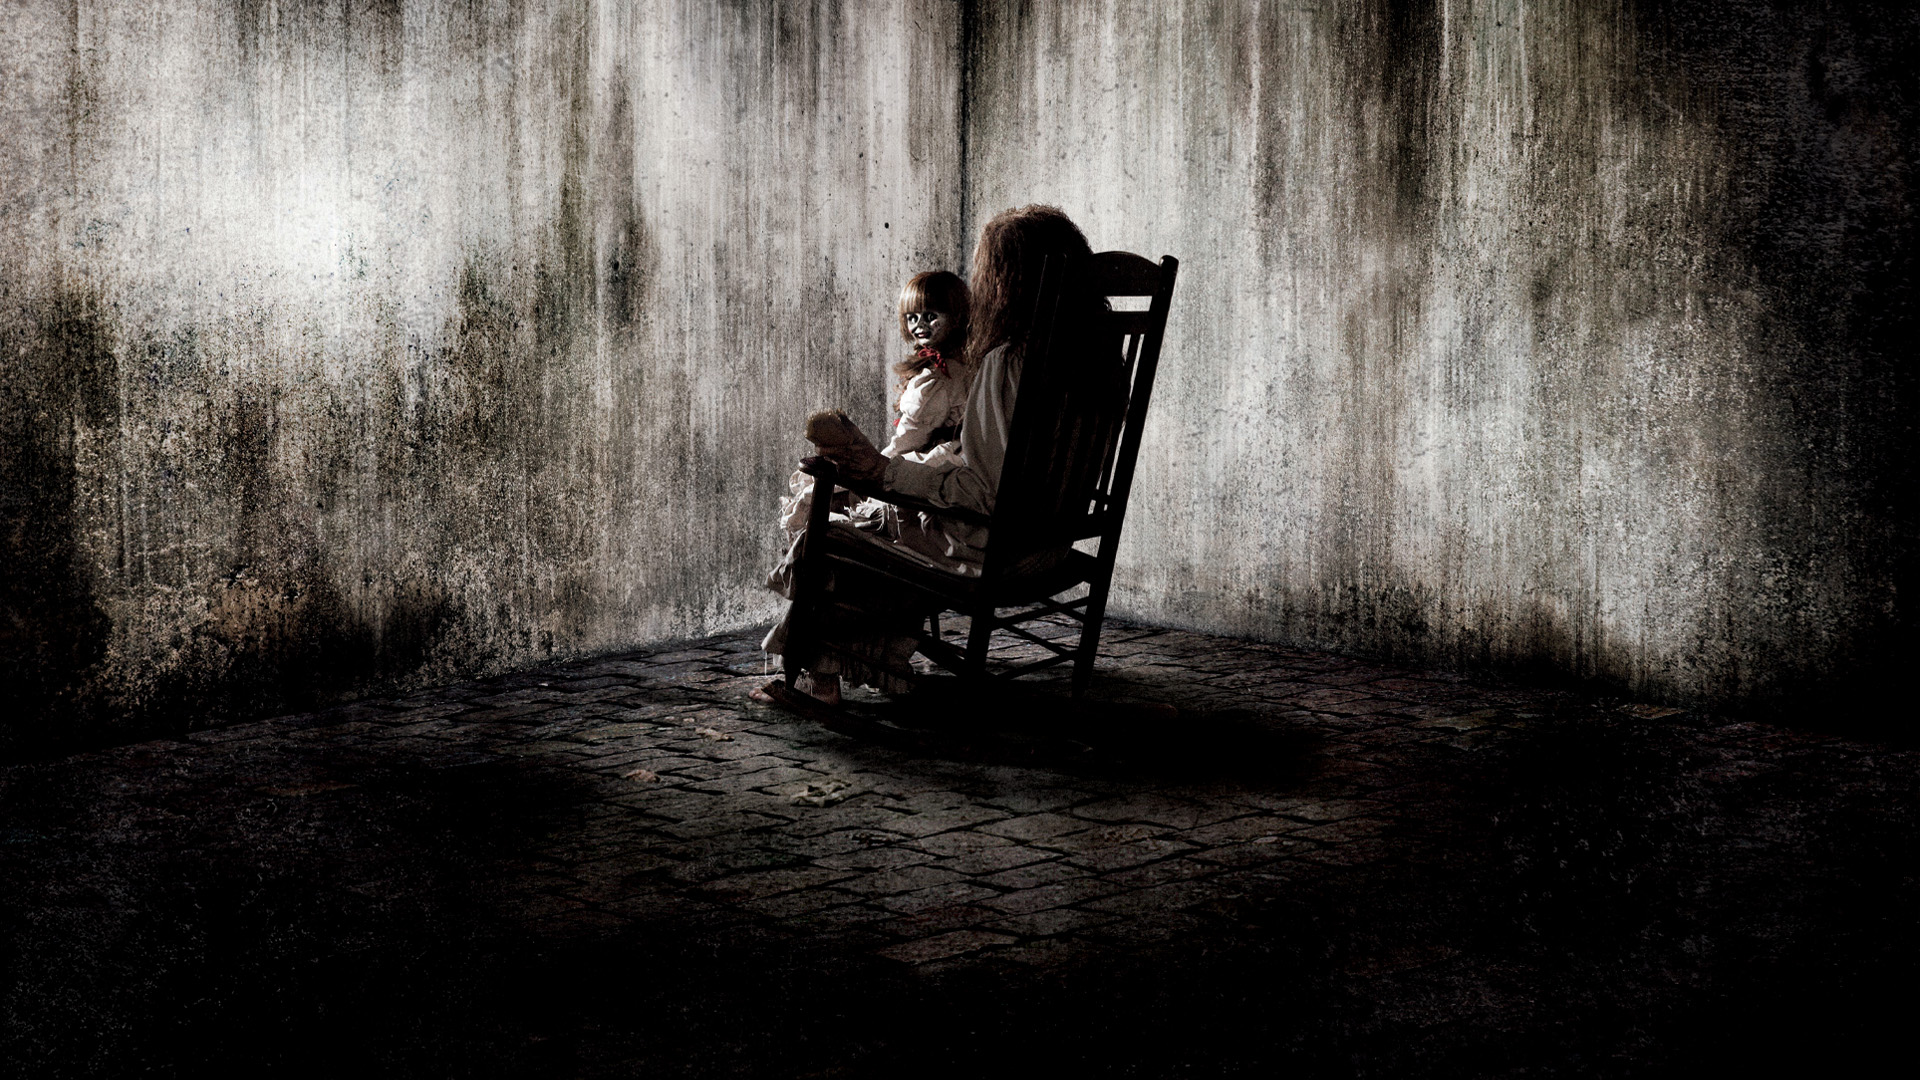 Movie The Conjuring 1920x1080